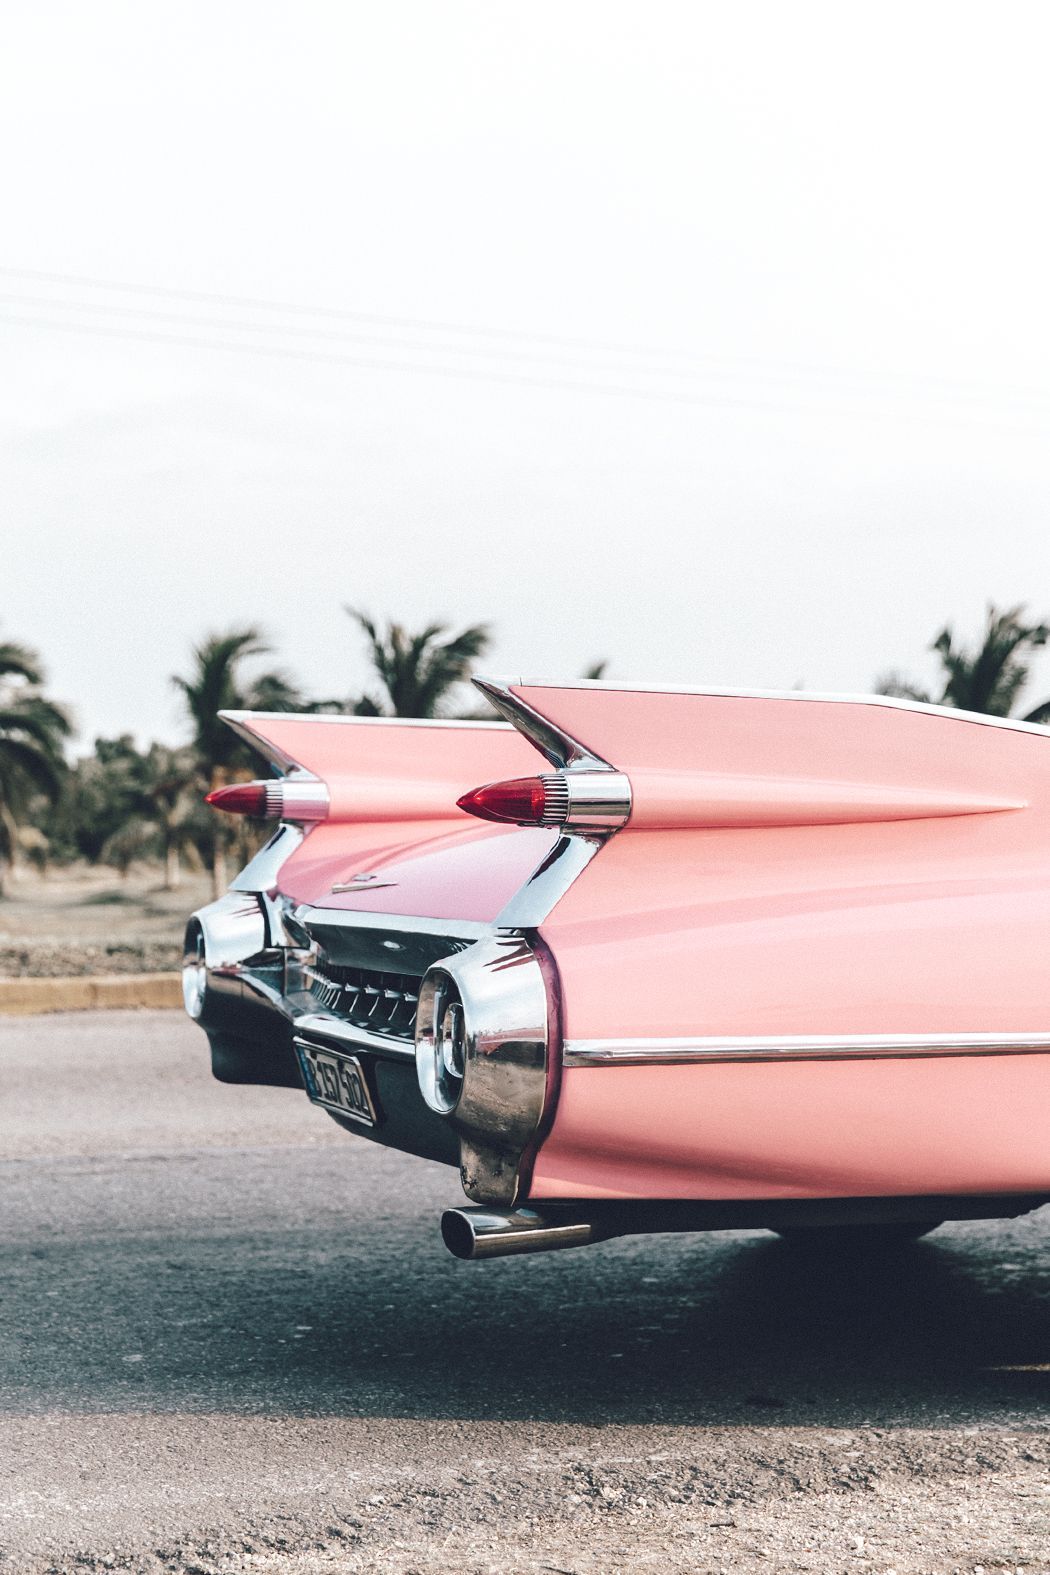 A pink car is parked on the side of road - Vintage